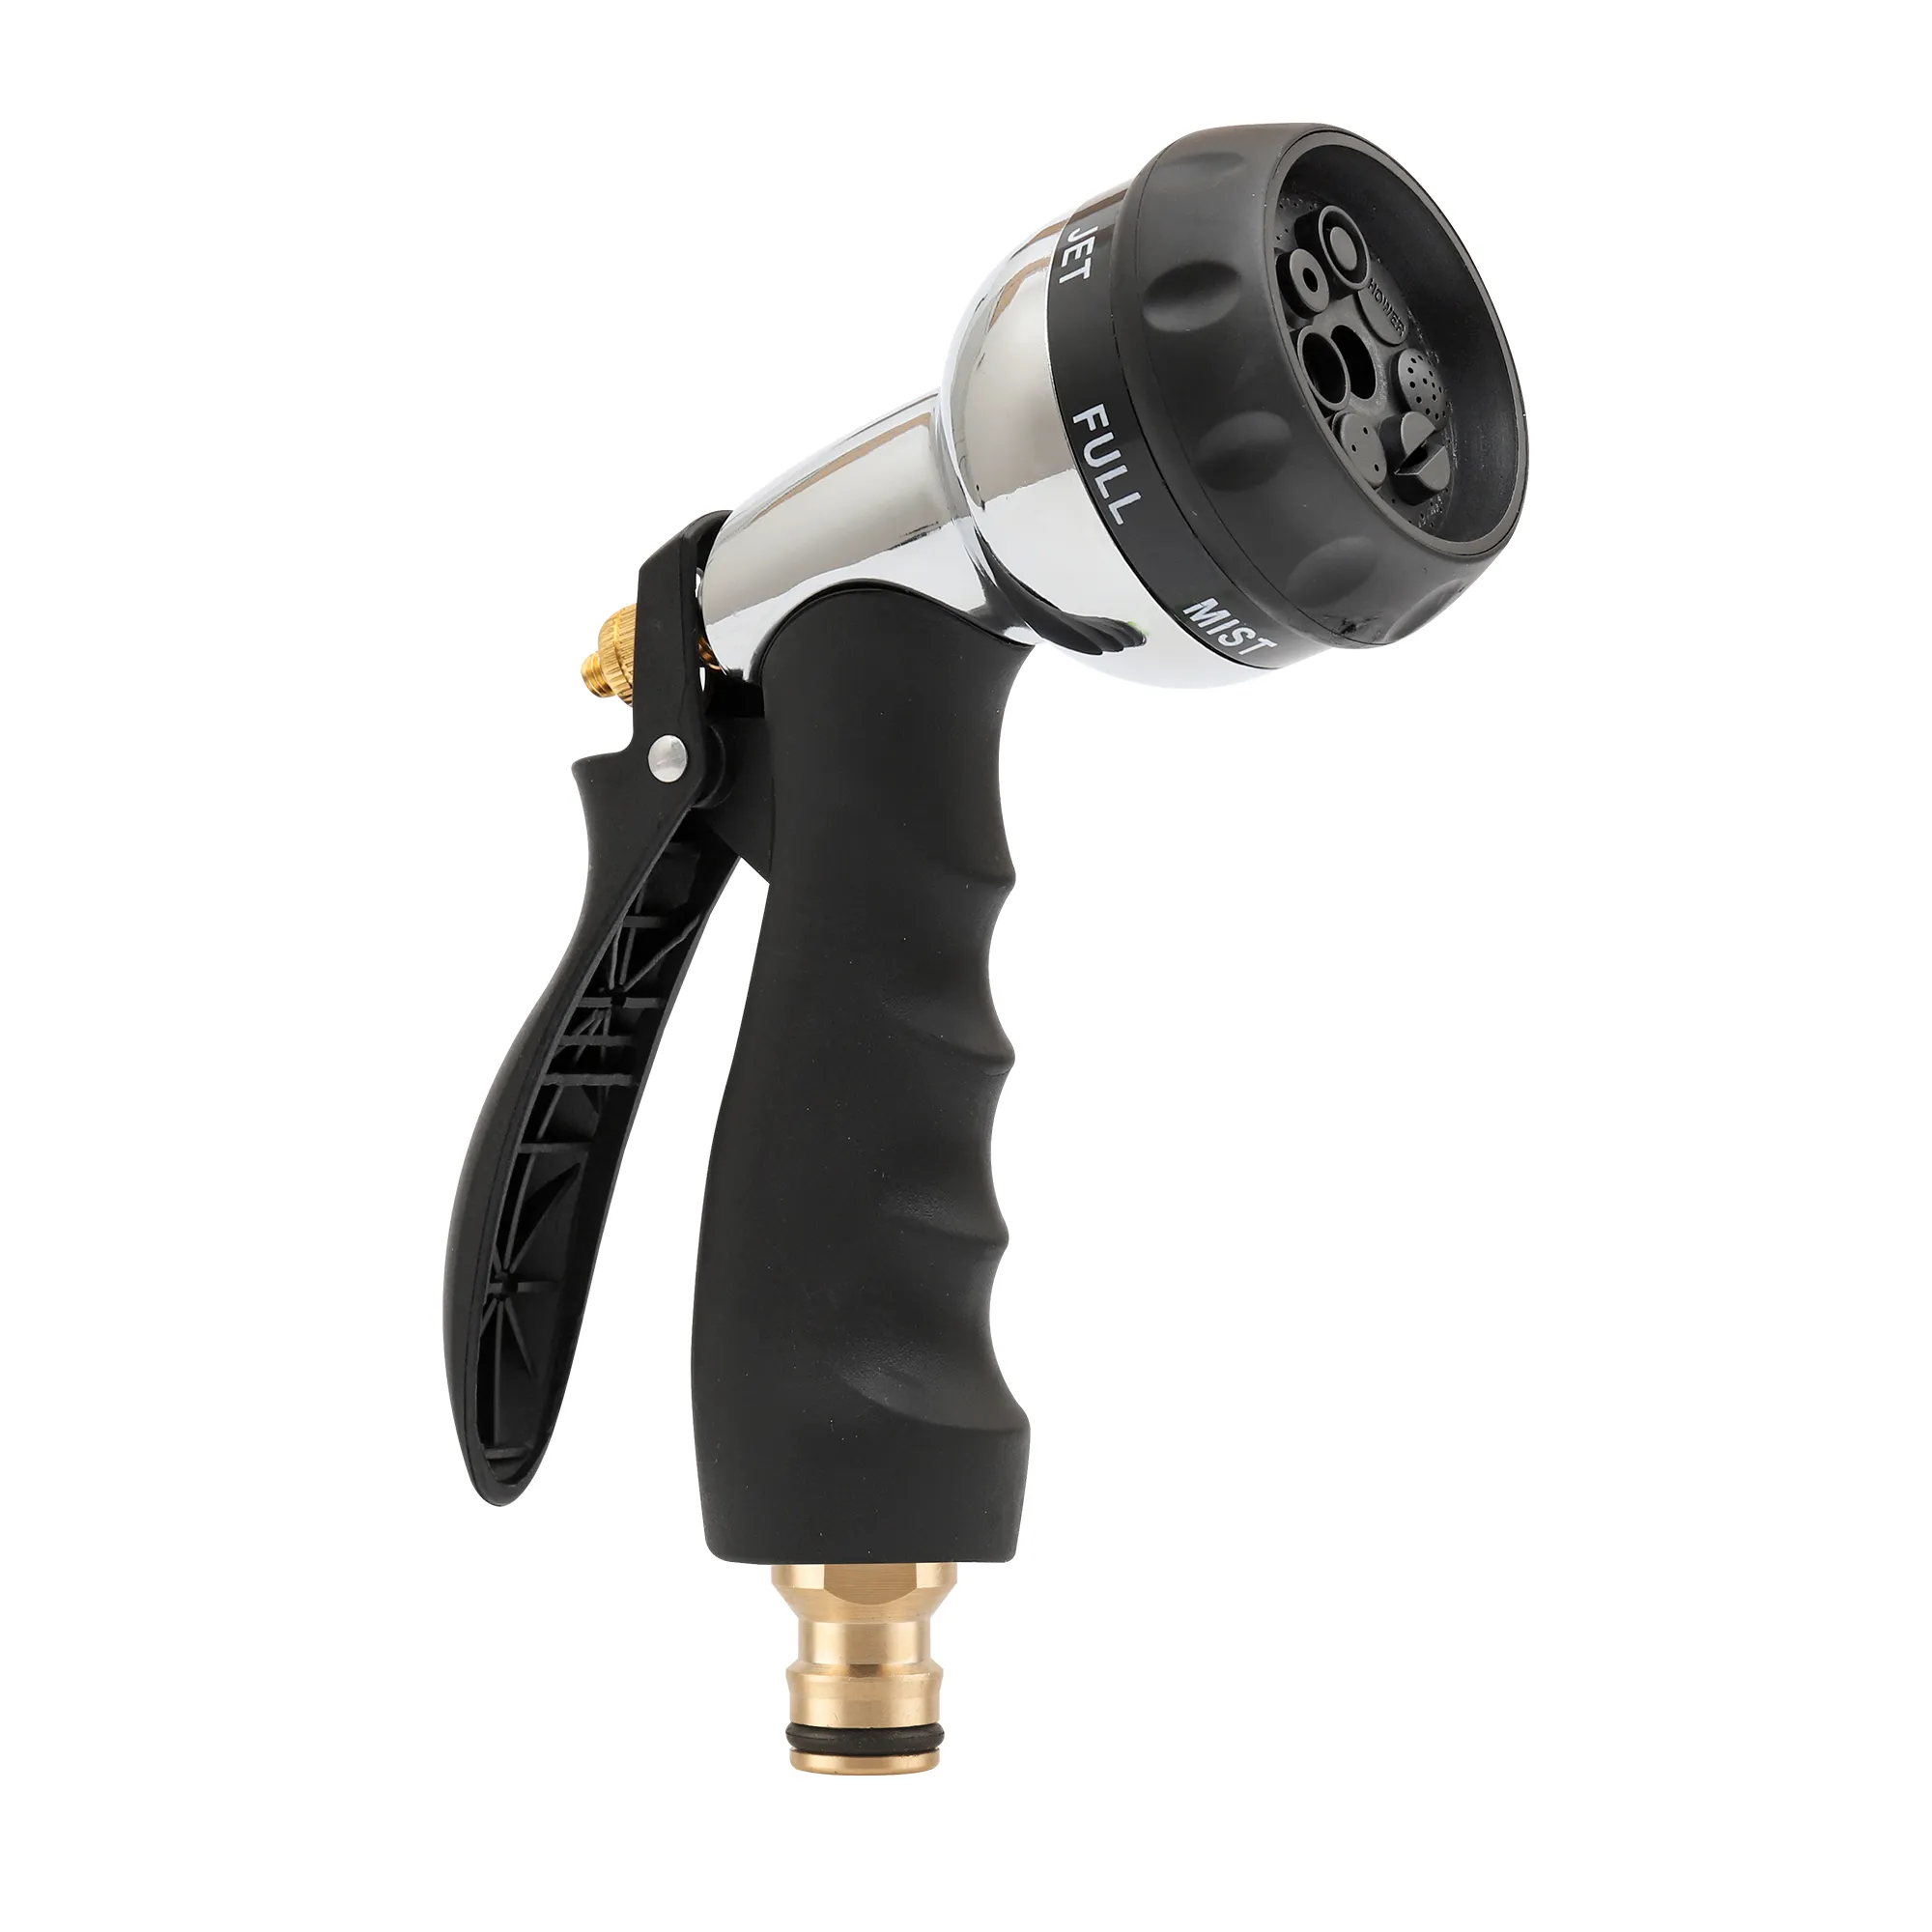 7 Watering Modes Garden Hose Nozzle, made of alloy with soft rubber coating, Ergonomic and Comfortable Handle